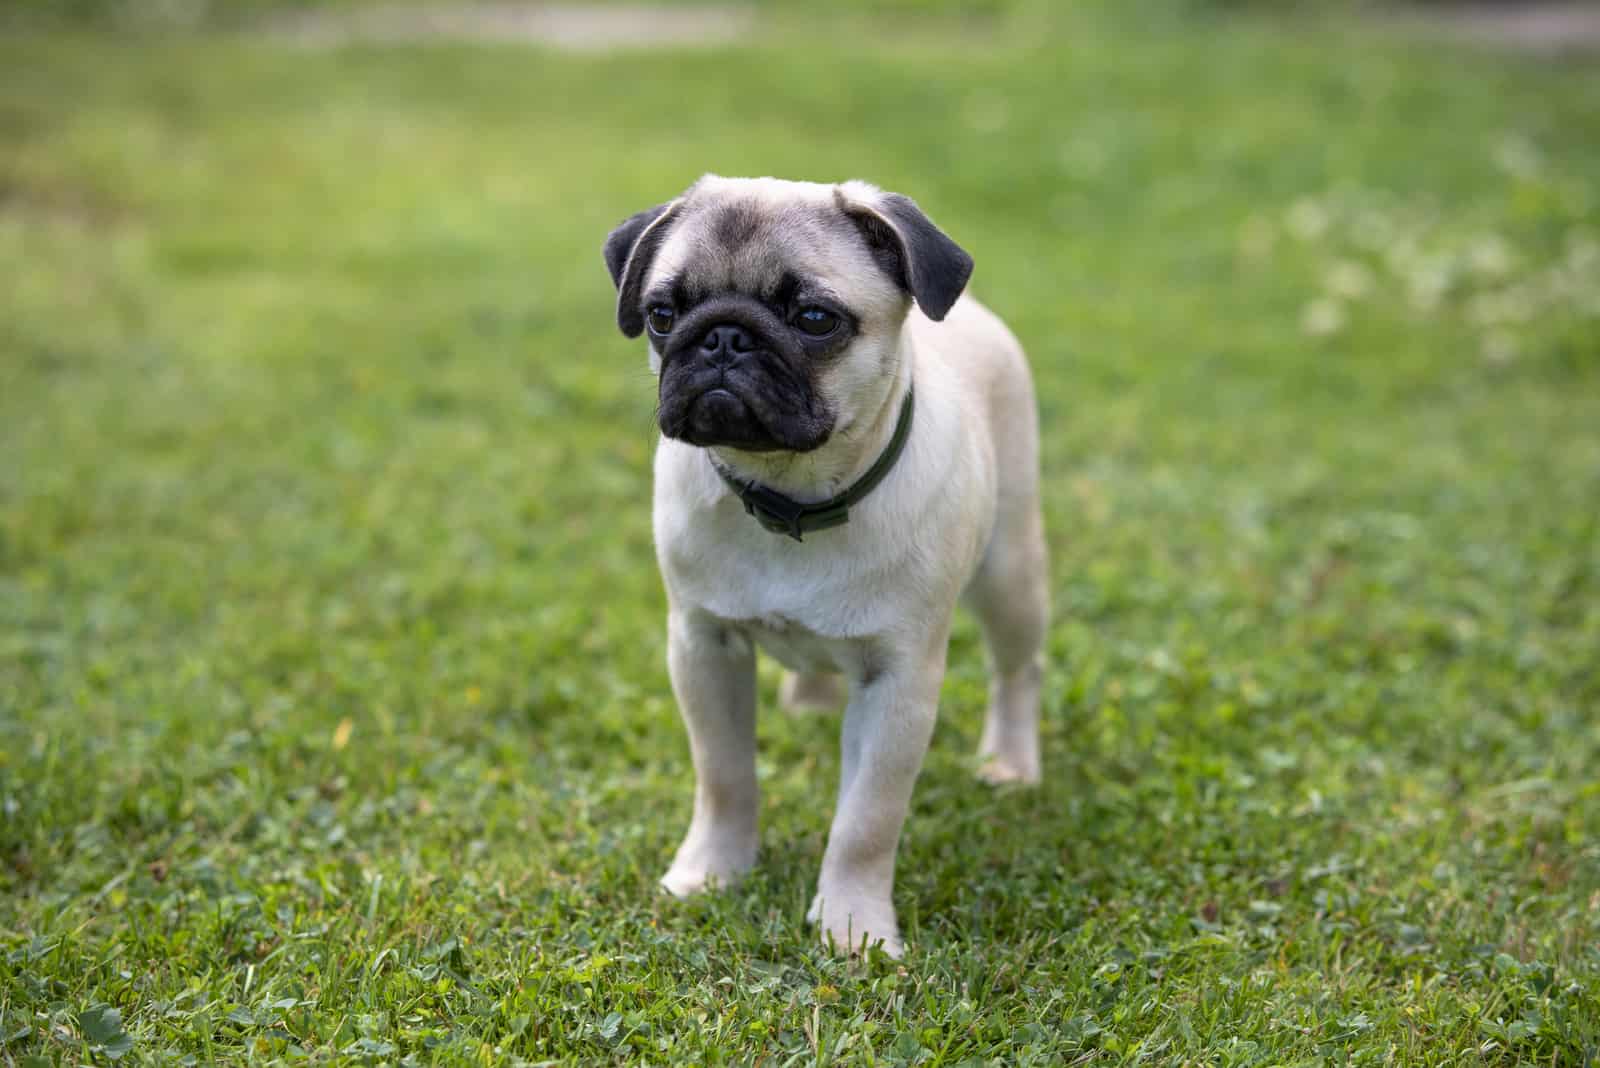 Pug standing on grass outside